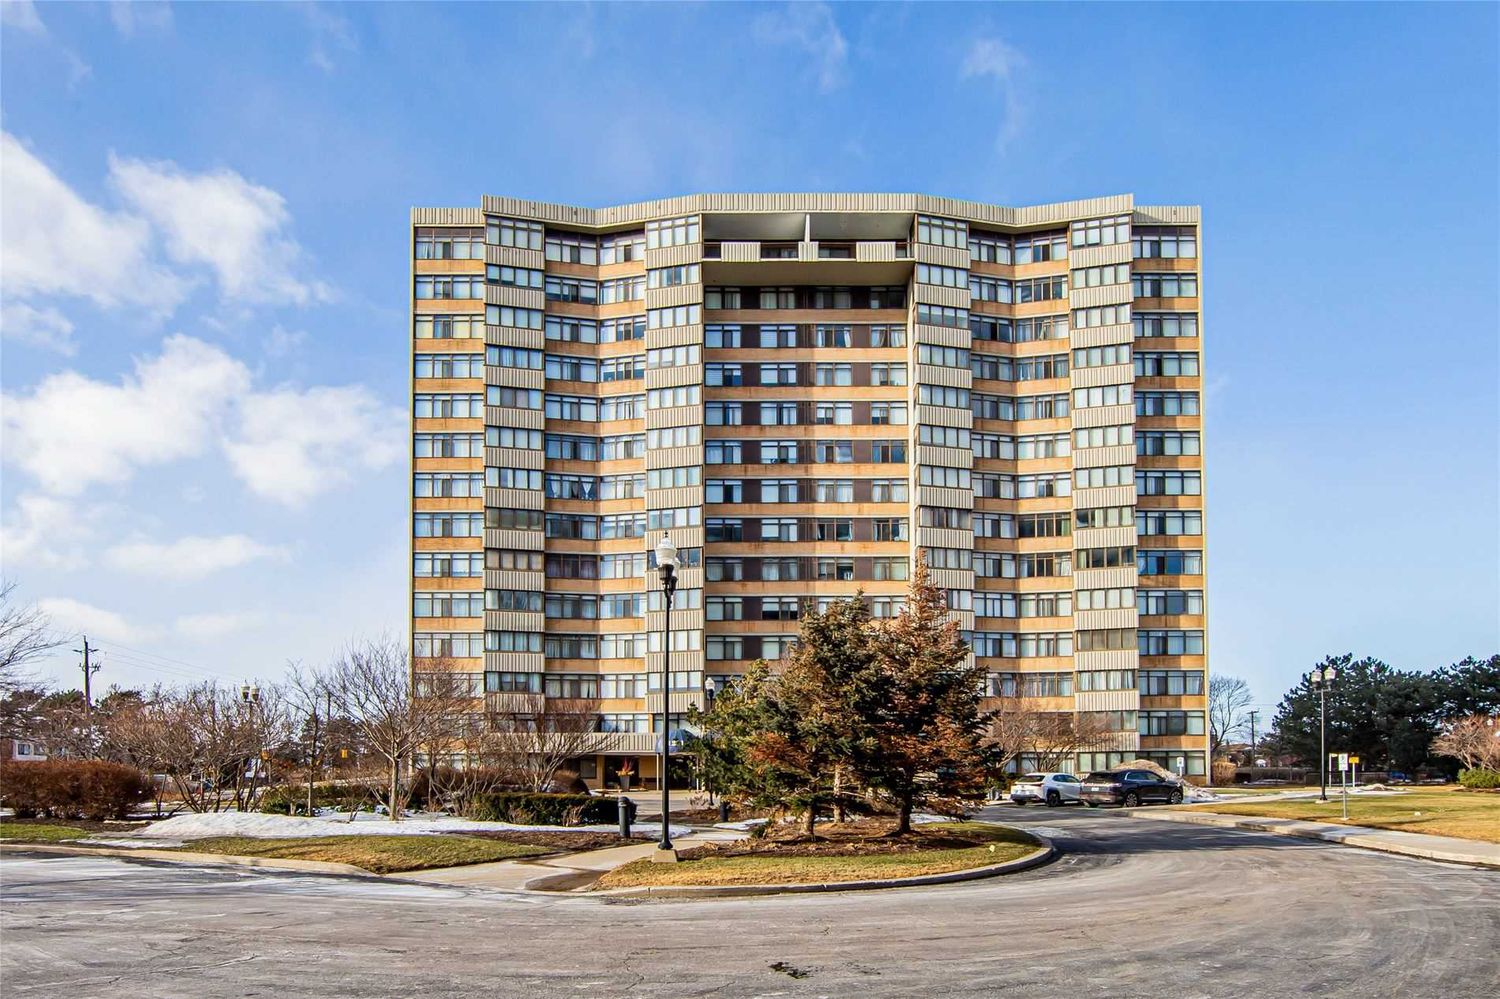 1201 Steeles Avenue W. The Courtlands Condos is located in  North York, Toronto - image #1 of 2